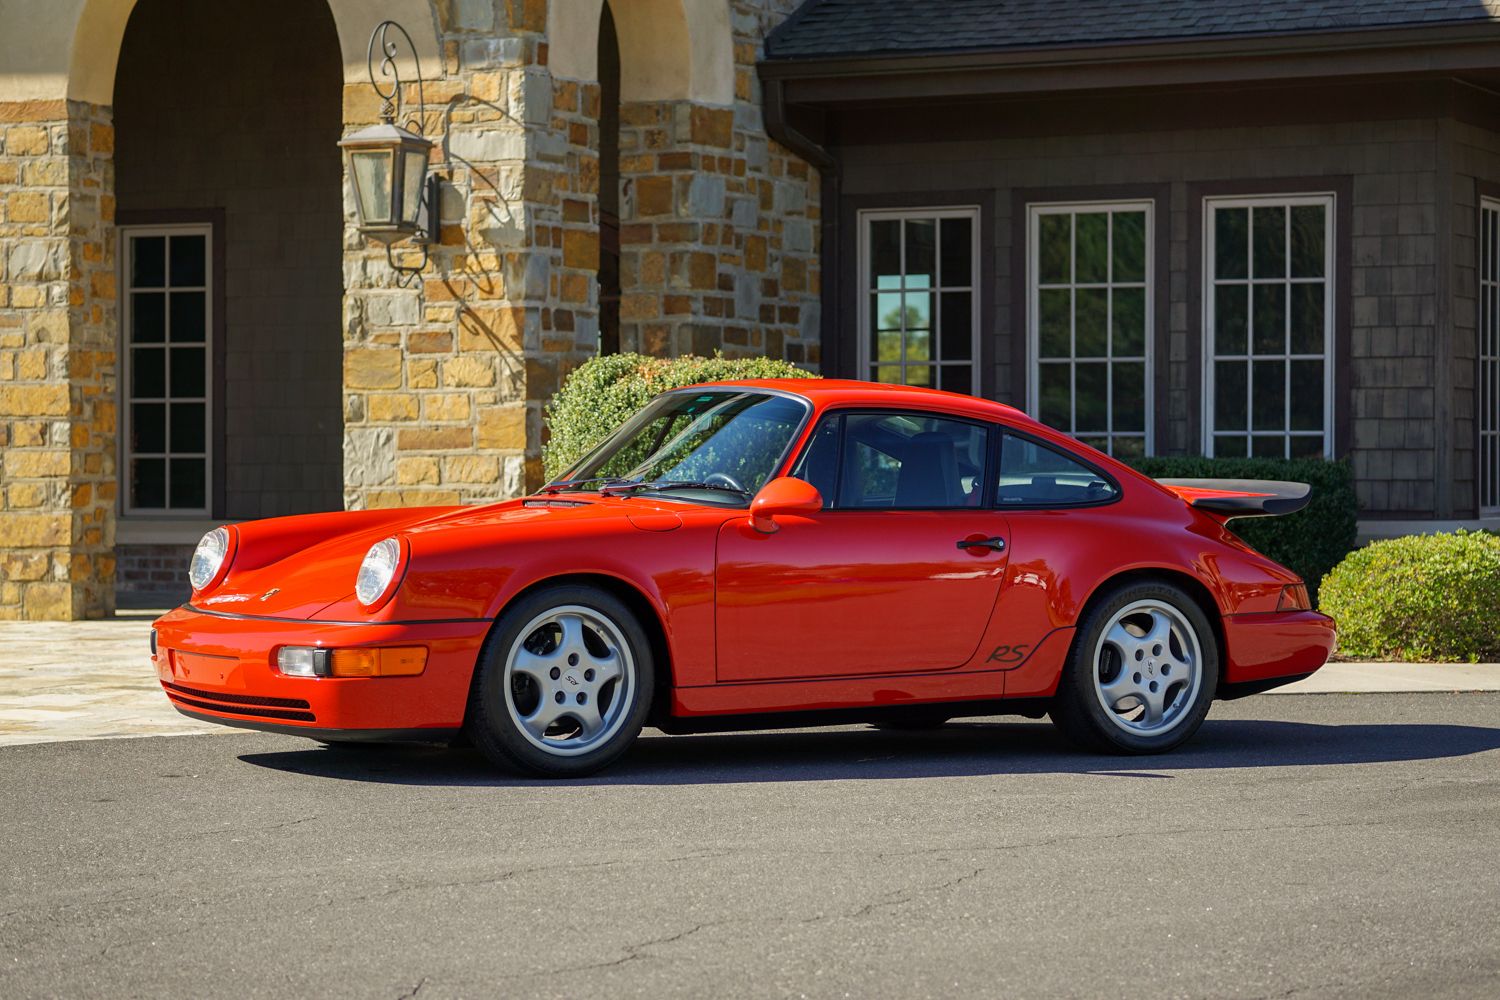 Porsche 964: The iconic sports car built for all generations.